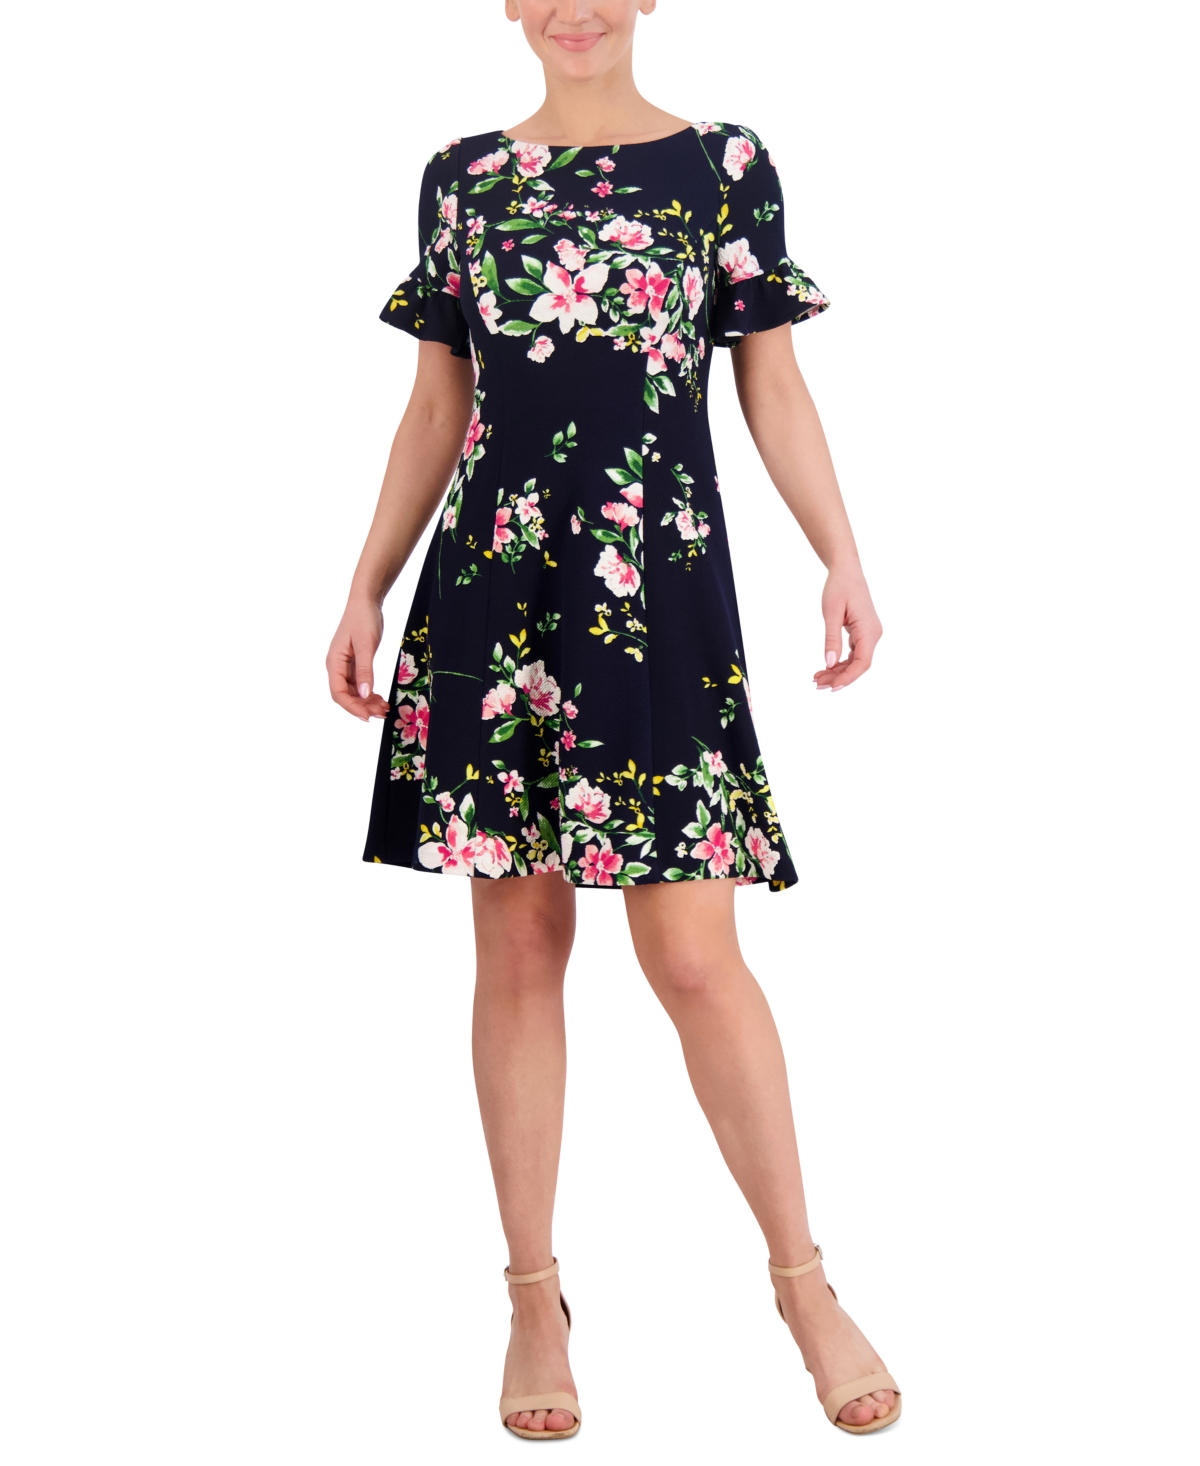 Women's Floral Fit & Flare Dress - Navy Multi